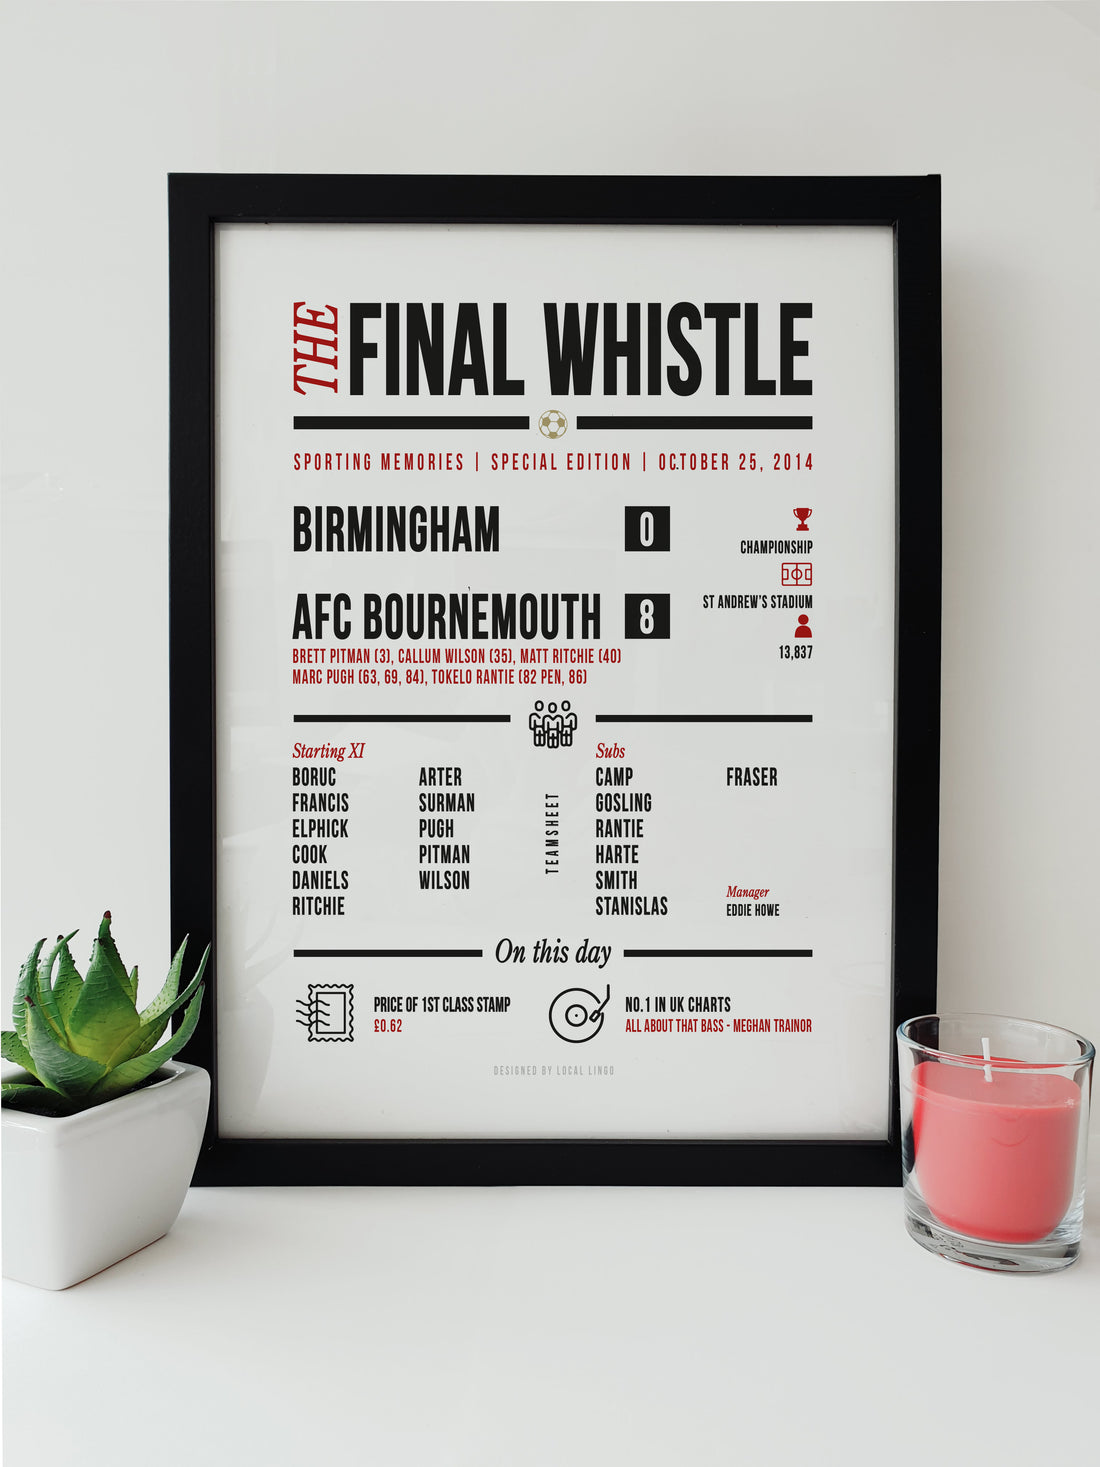 Bournemouth 8-0 Birmingham 2014 The Final Whistle Match Report Football Fan Artwork Gift Local Lingo